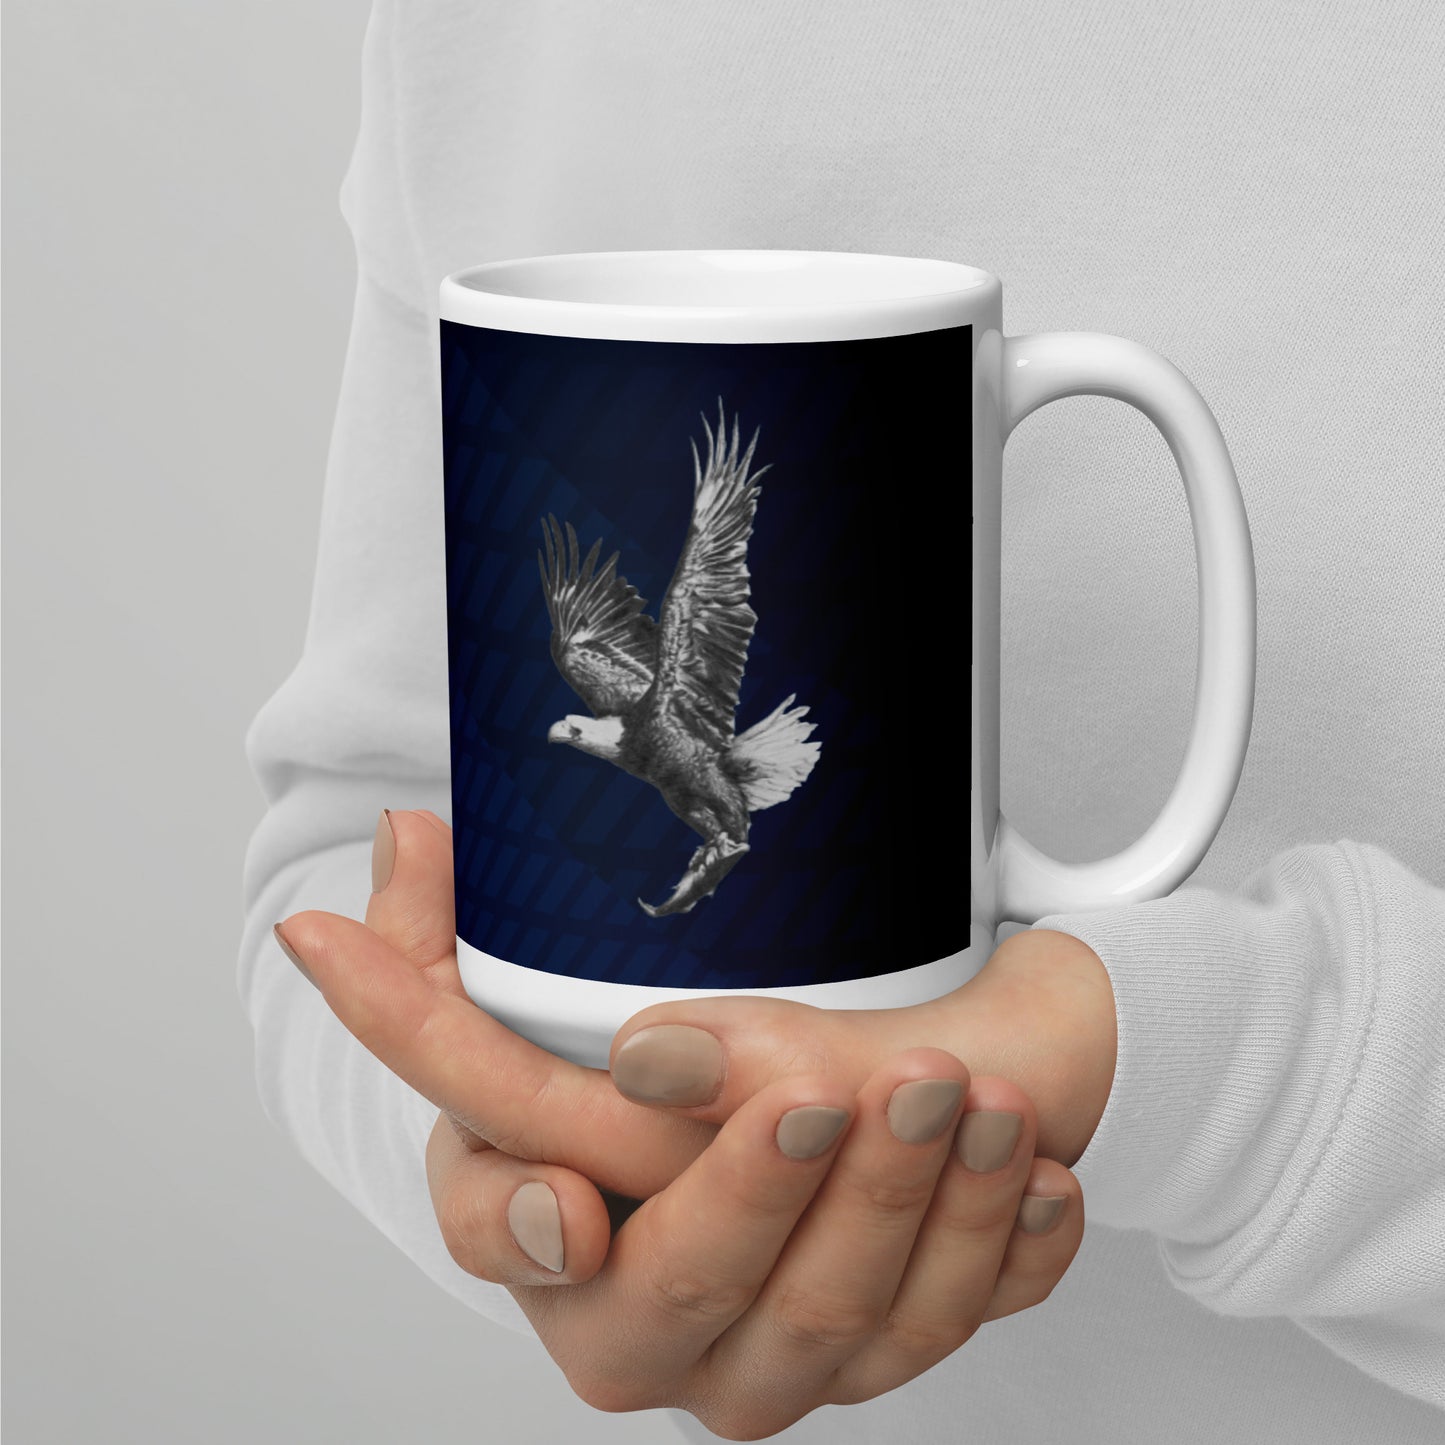 This "Eagle White Glossy Mug(B)" is from a drawing of mine created with a graphite pencil. It has been digitally optimized and transferred to a 15oz white glossy mug.